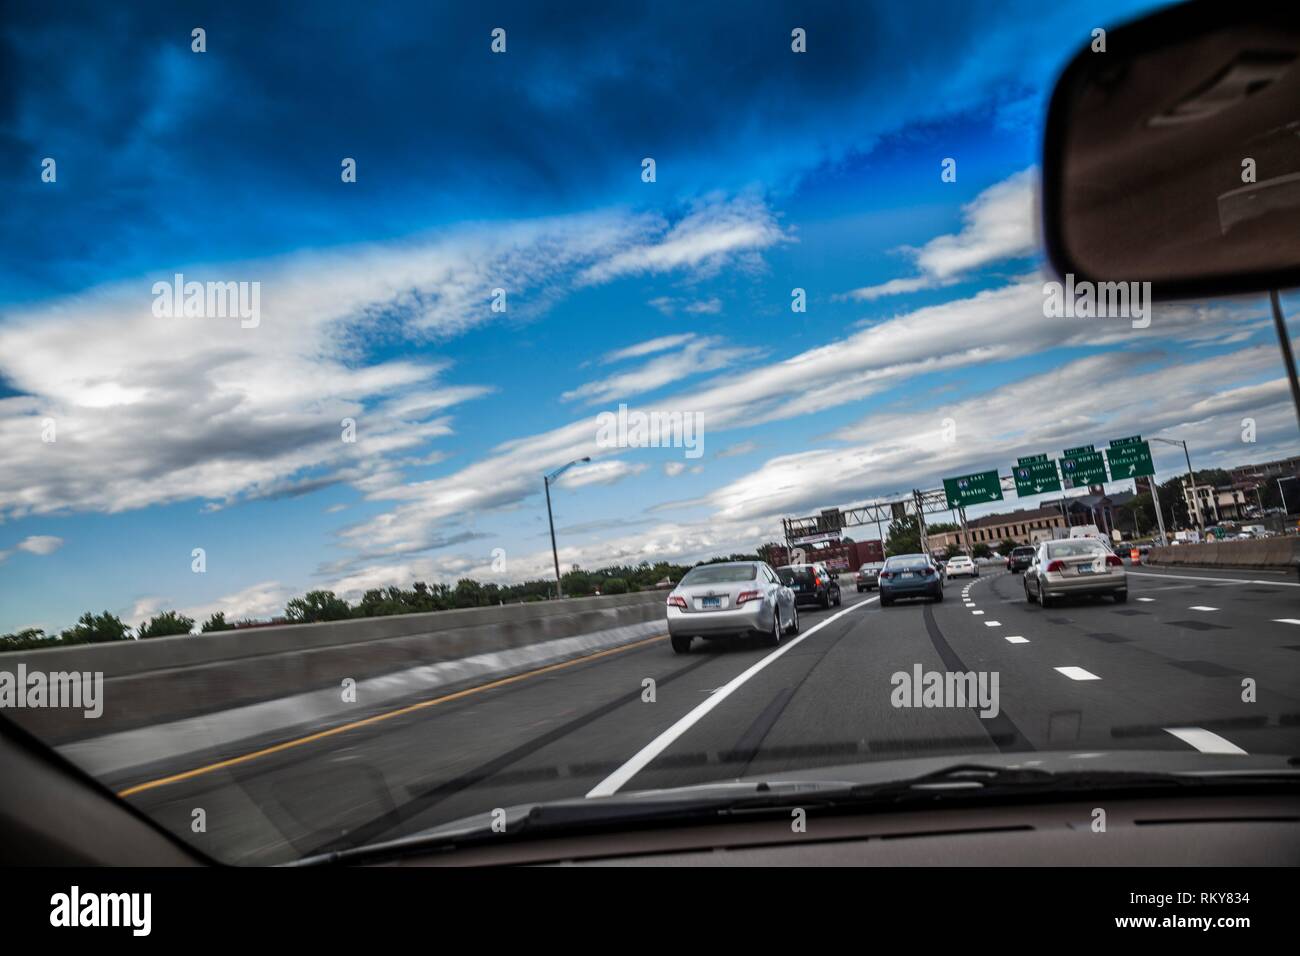 Car driving on a highway with route signs, as seen through its windshield. Stock Photo